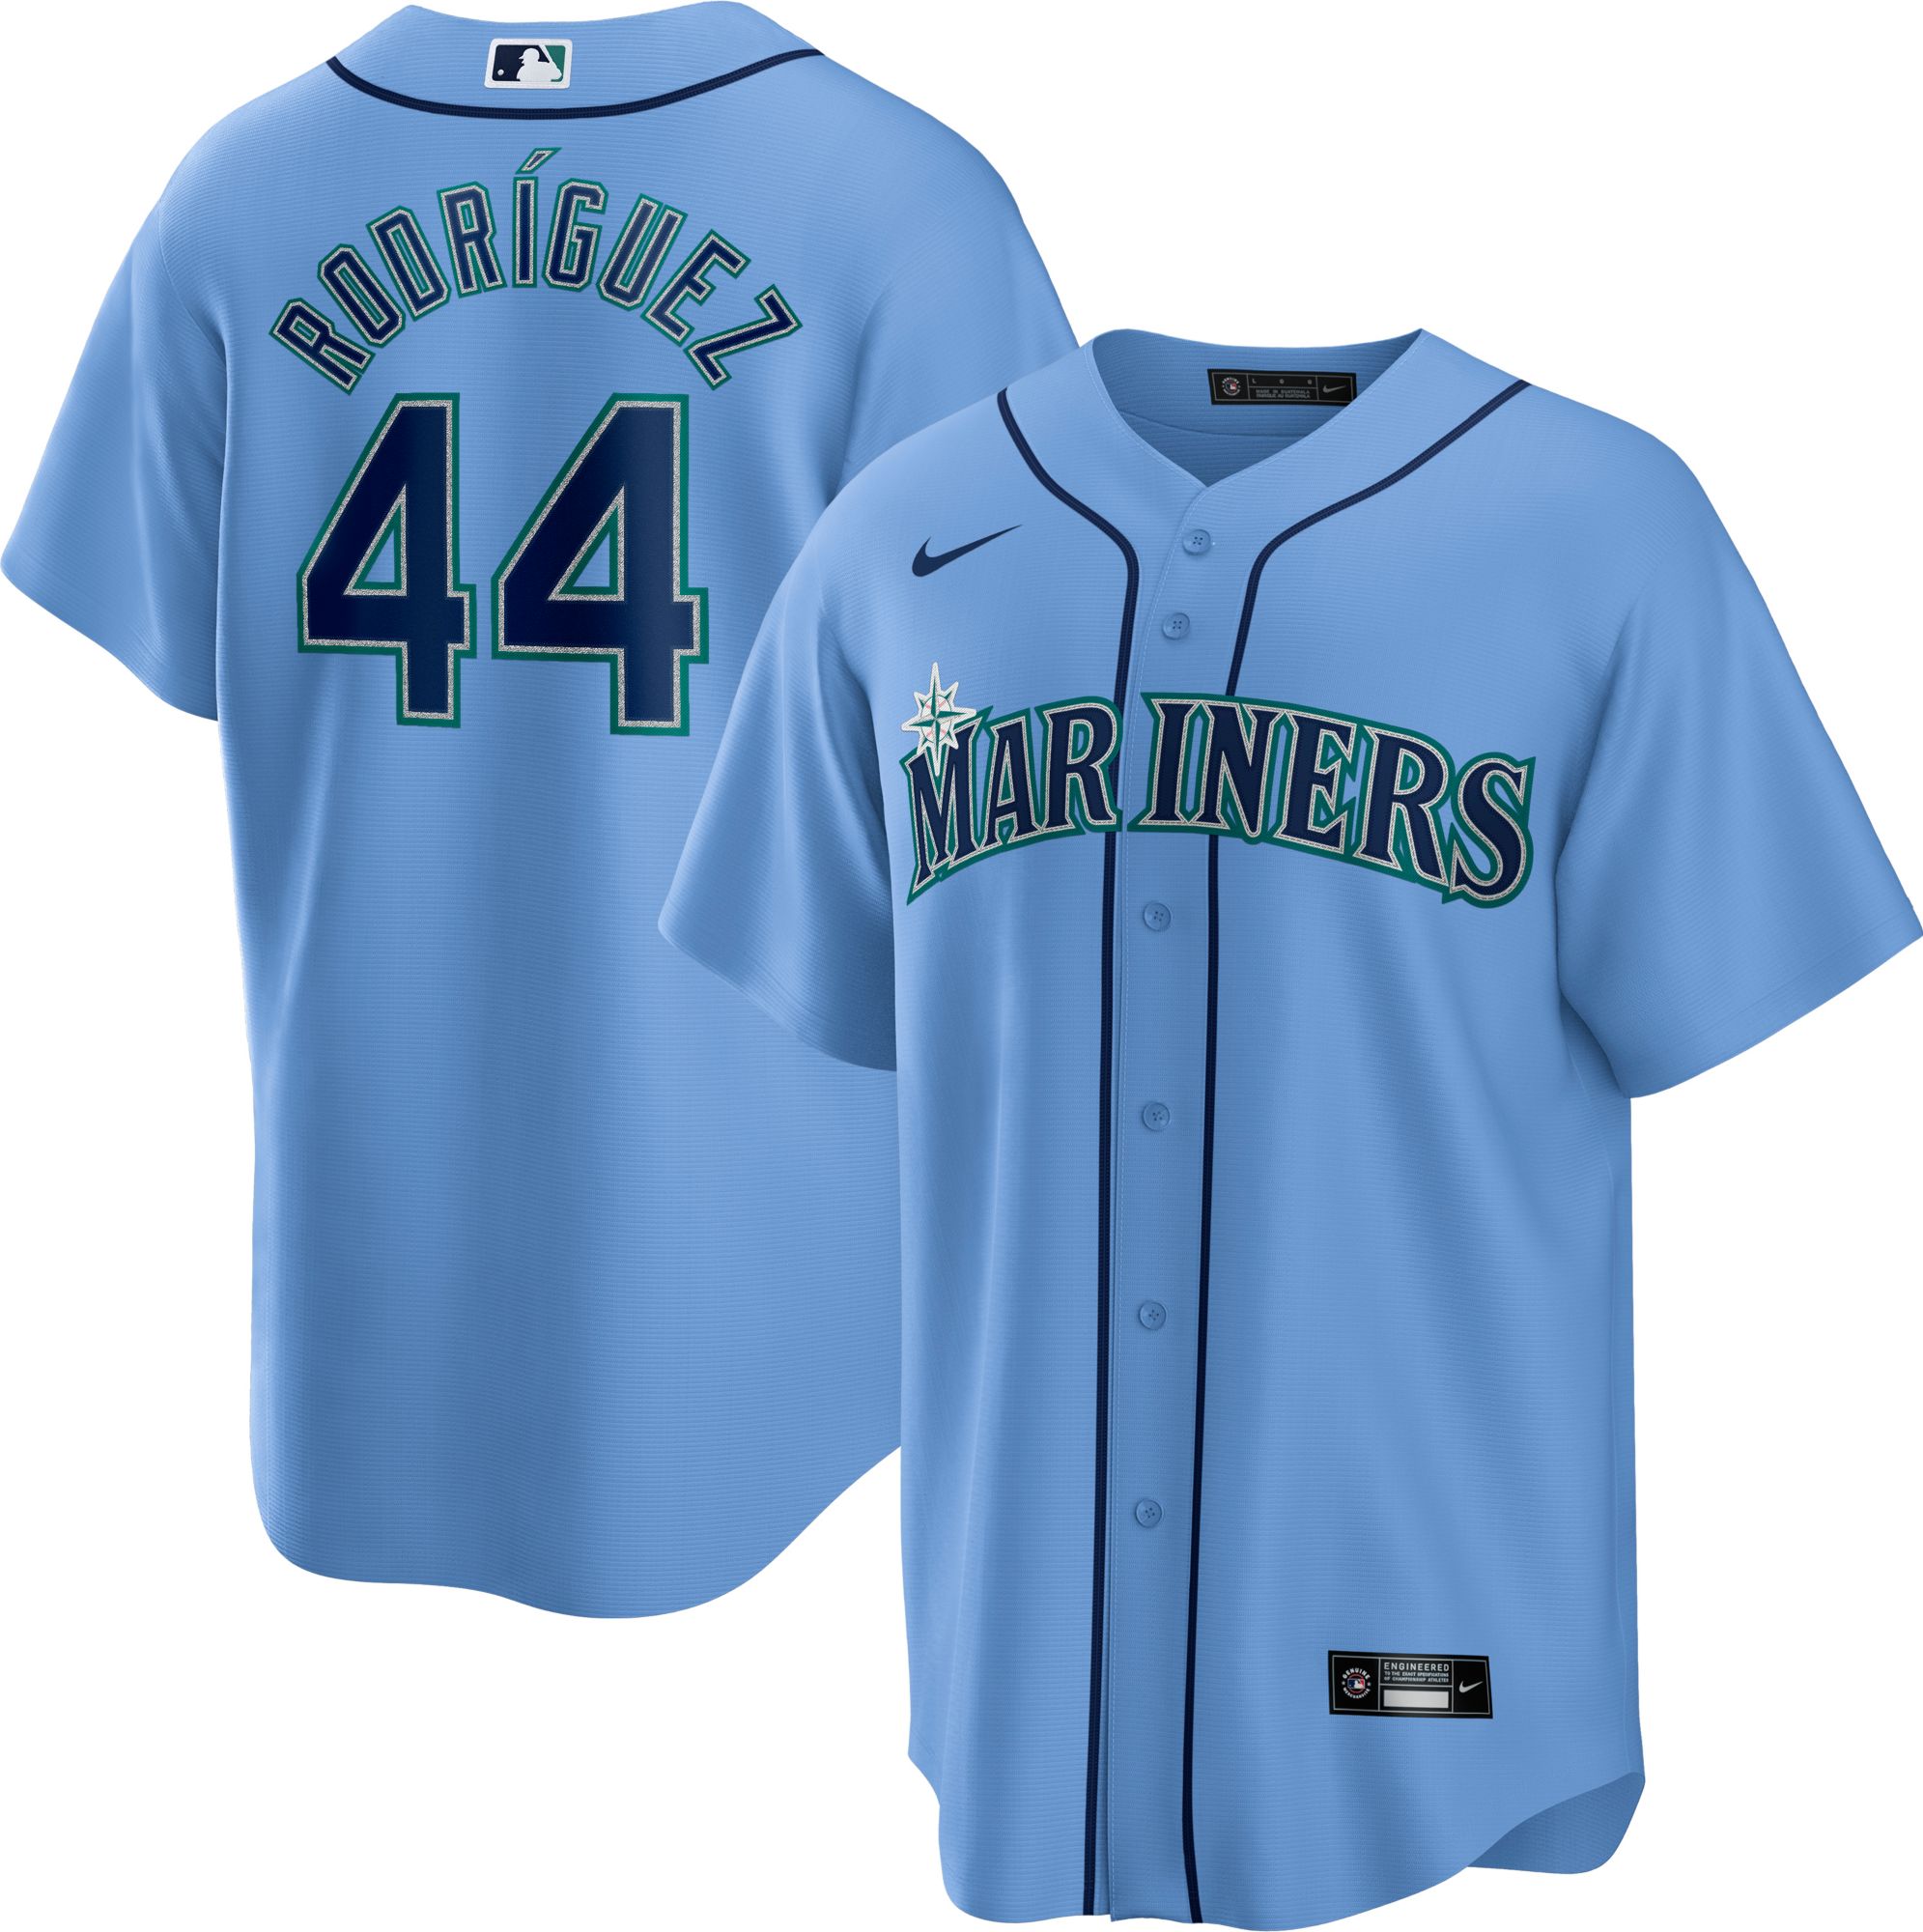 Seattle Mariners White 2020 Home Authentic Custom Men’s Jersey